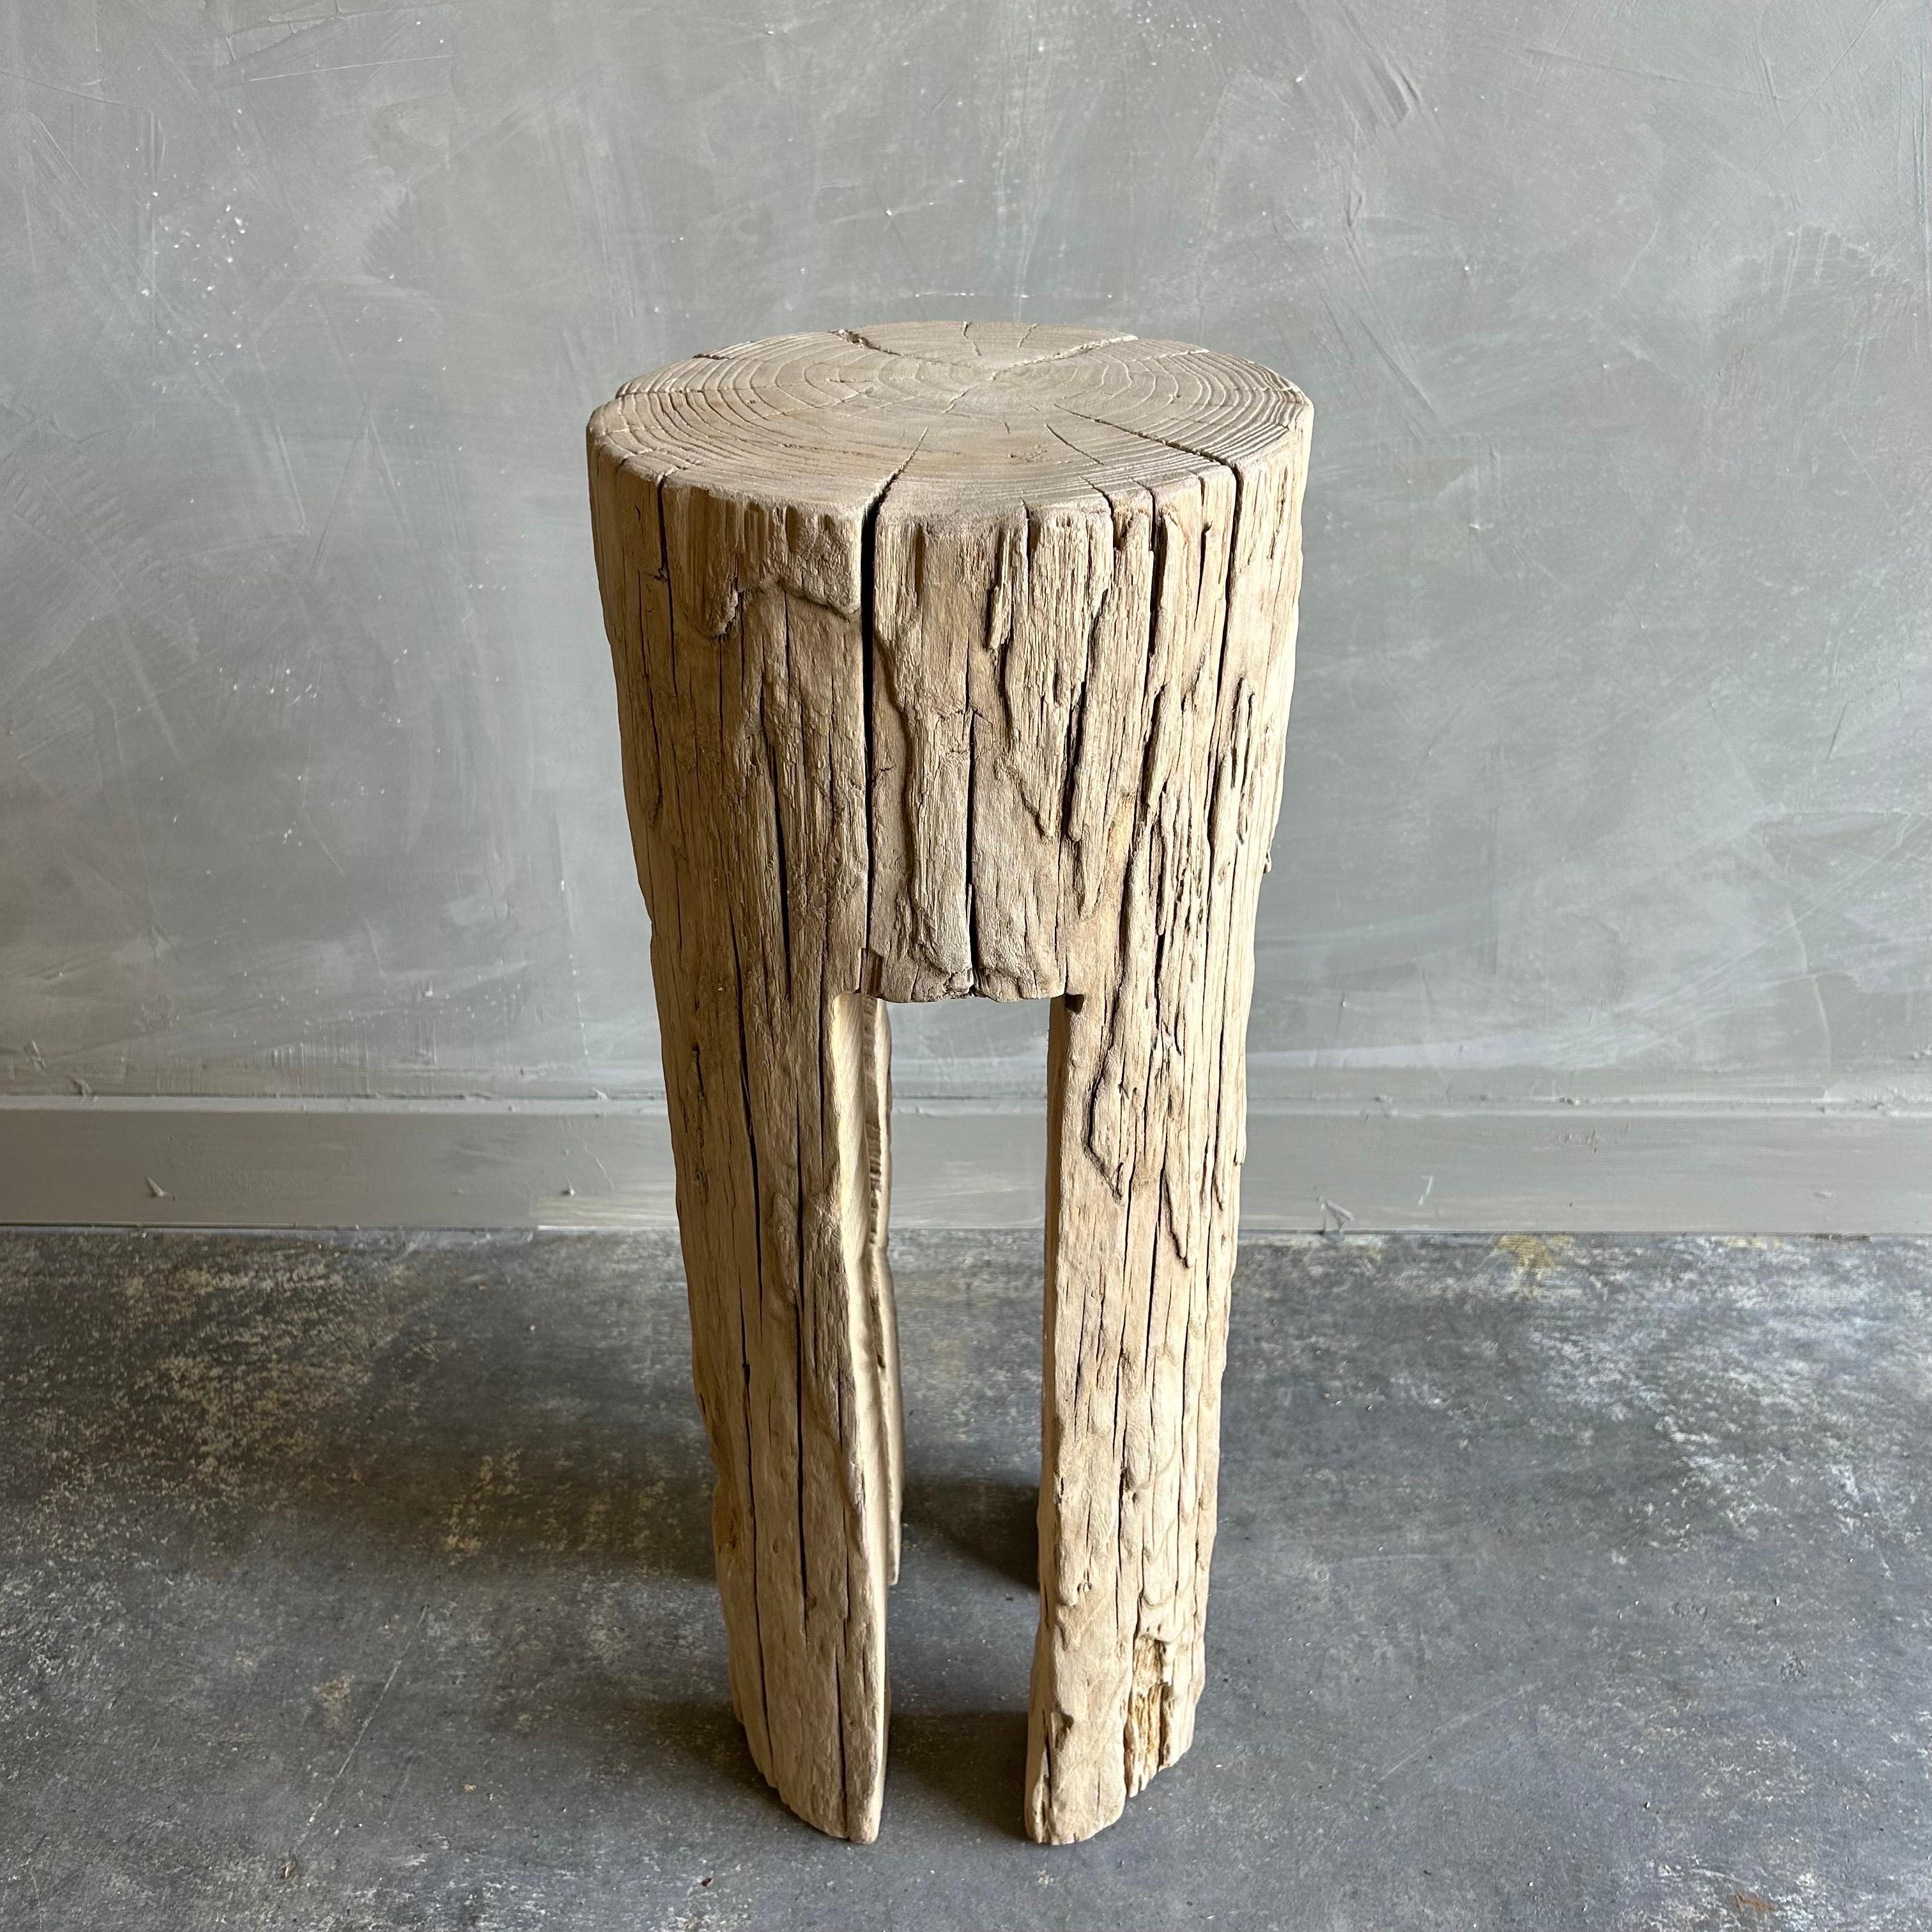 Custom Elm Wood Stump Side Table or Drink Table In Good Condition For Sale In Brea, CA